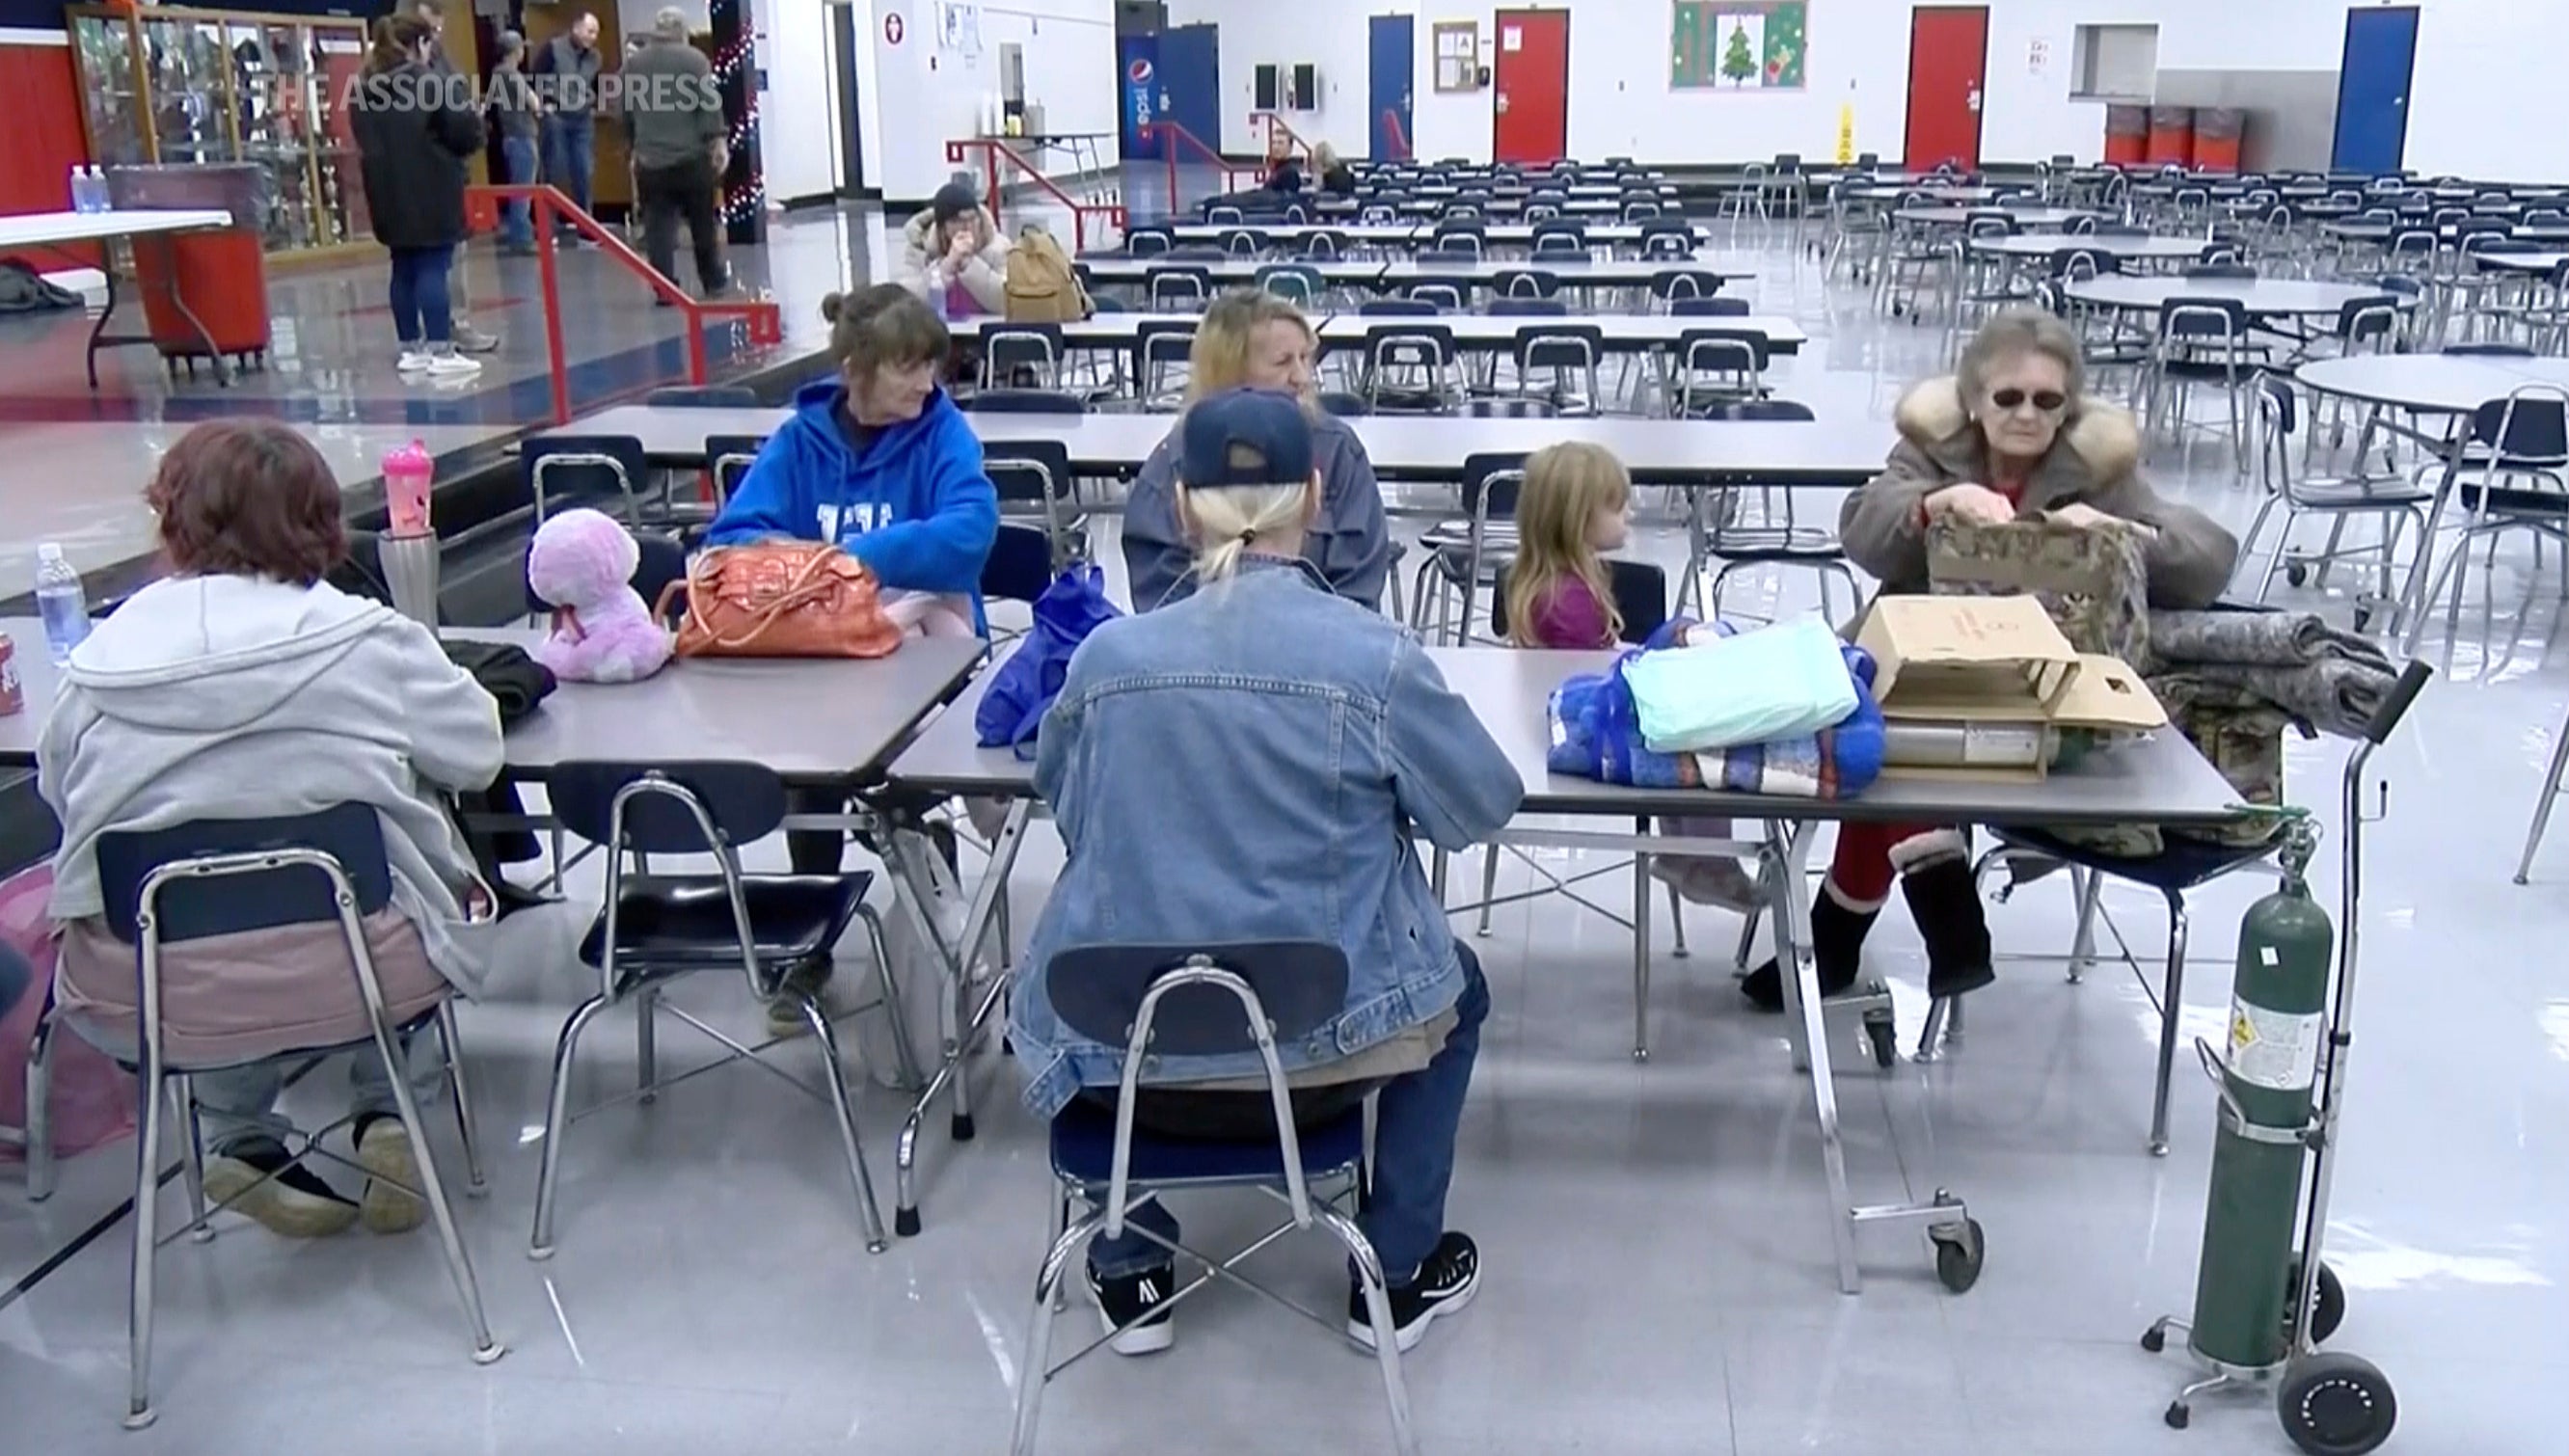 Residents spent the night in a local middle school